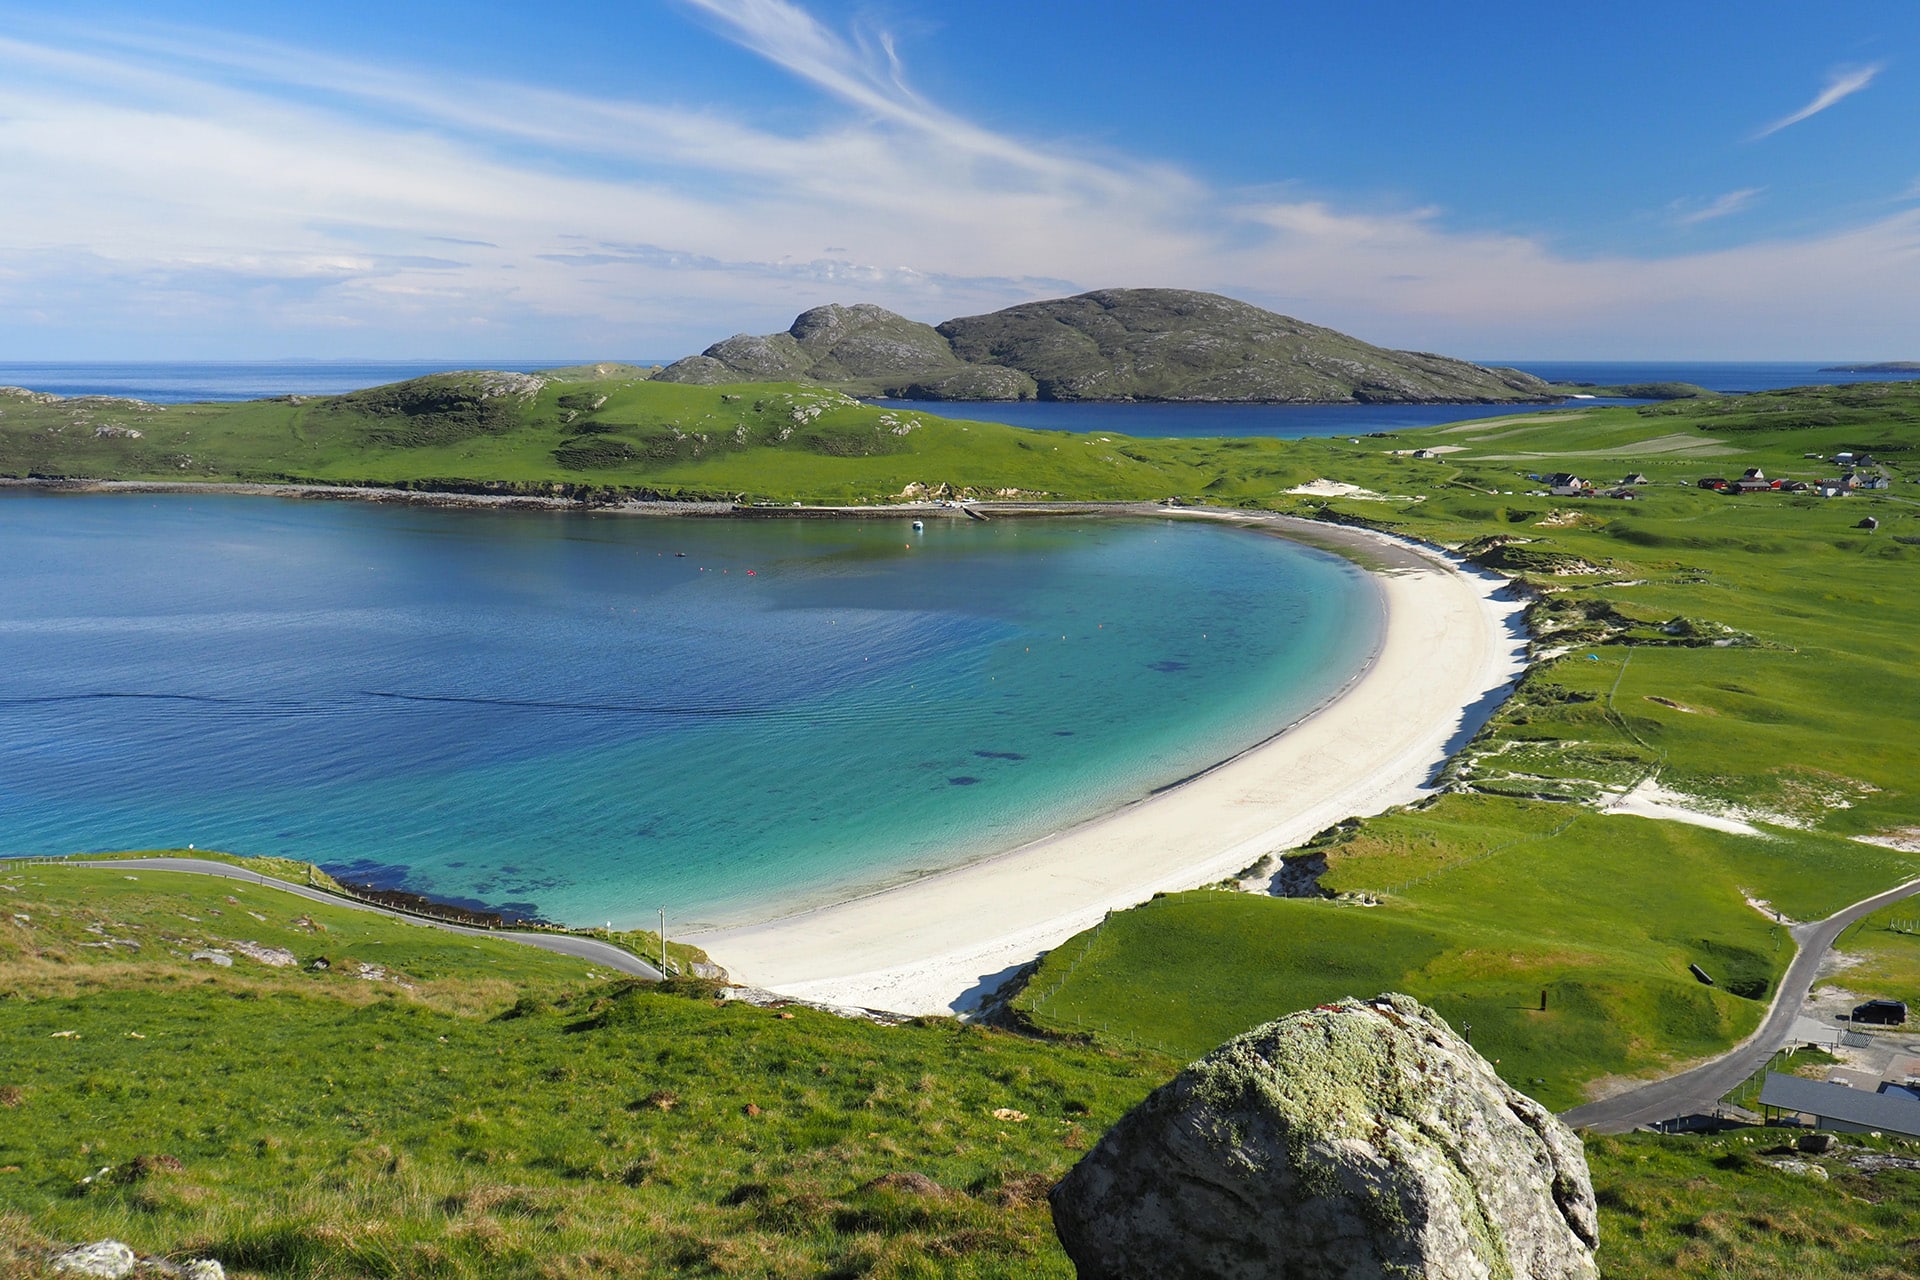 Beach on the Isle of Vatersay, Outer Hebrides